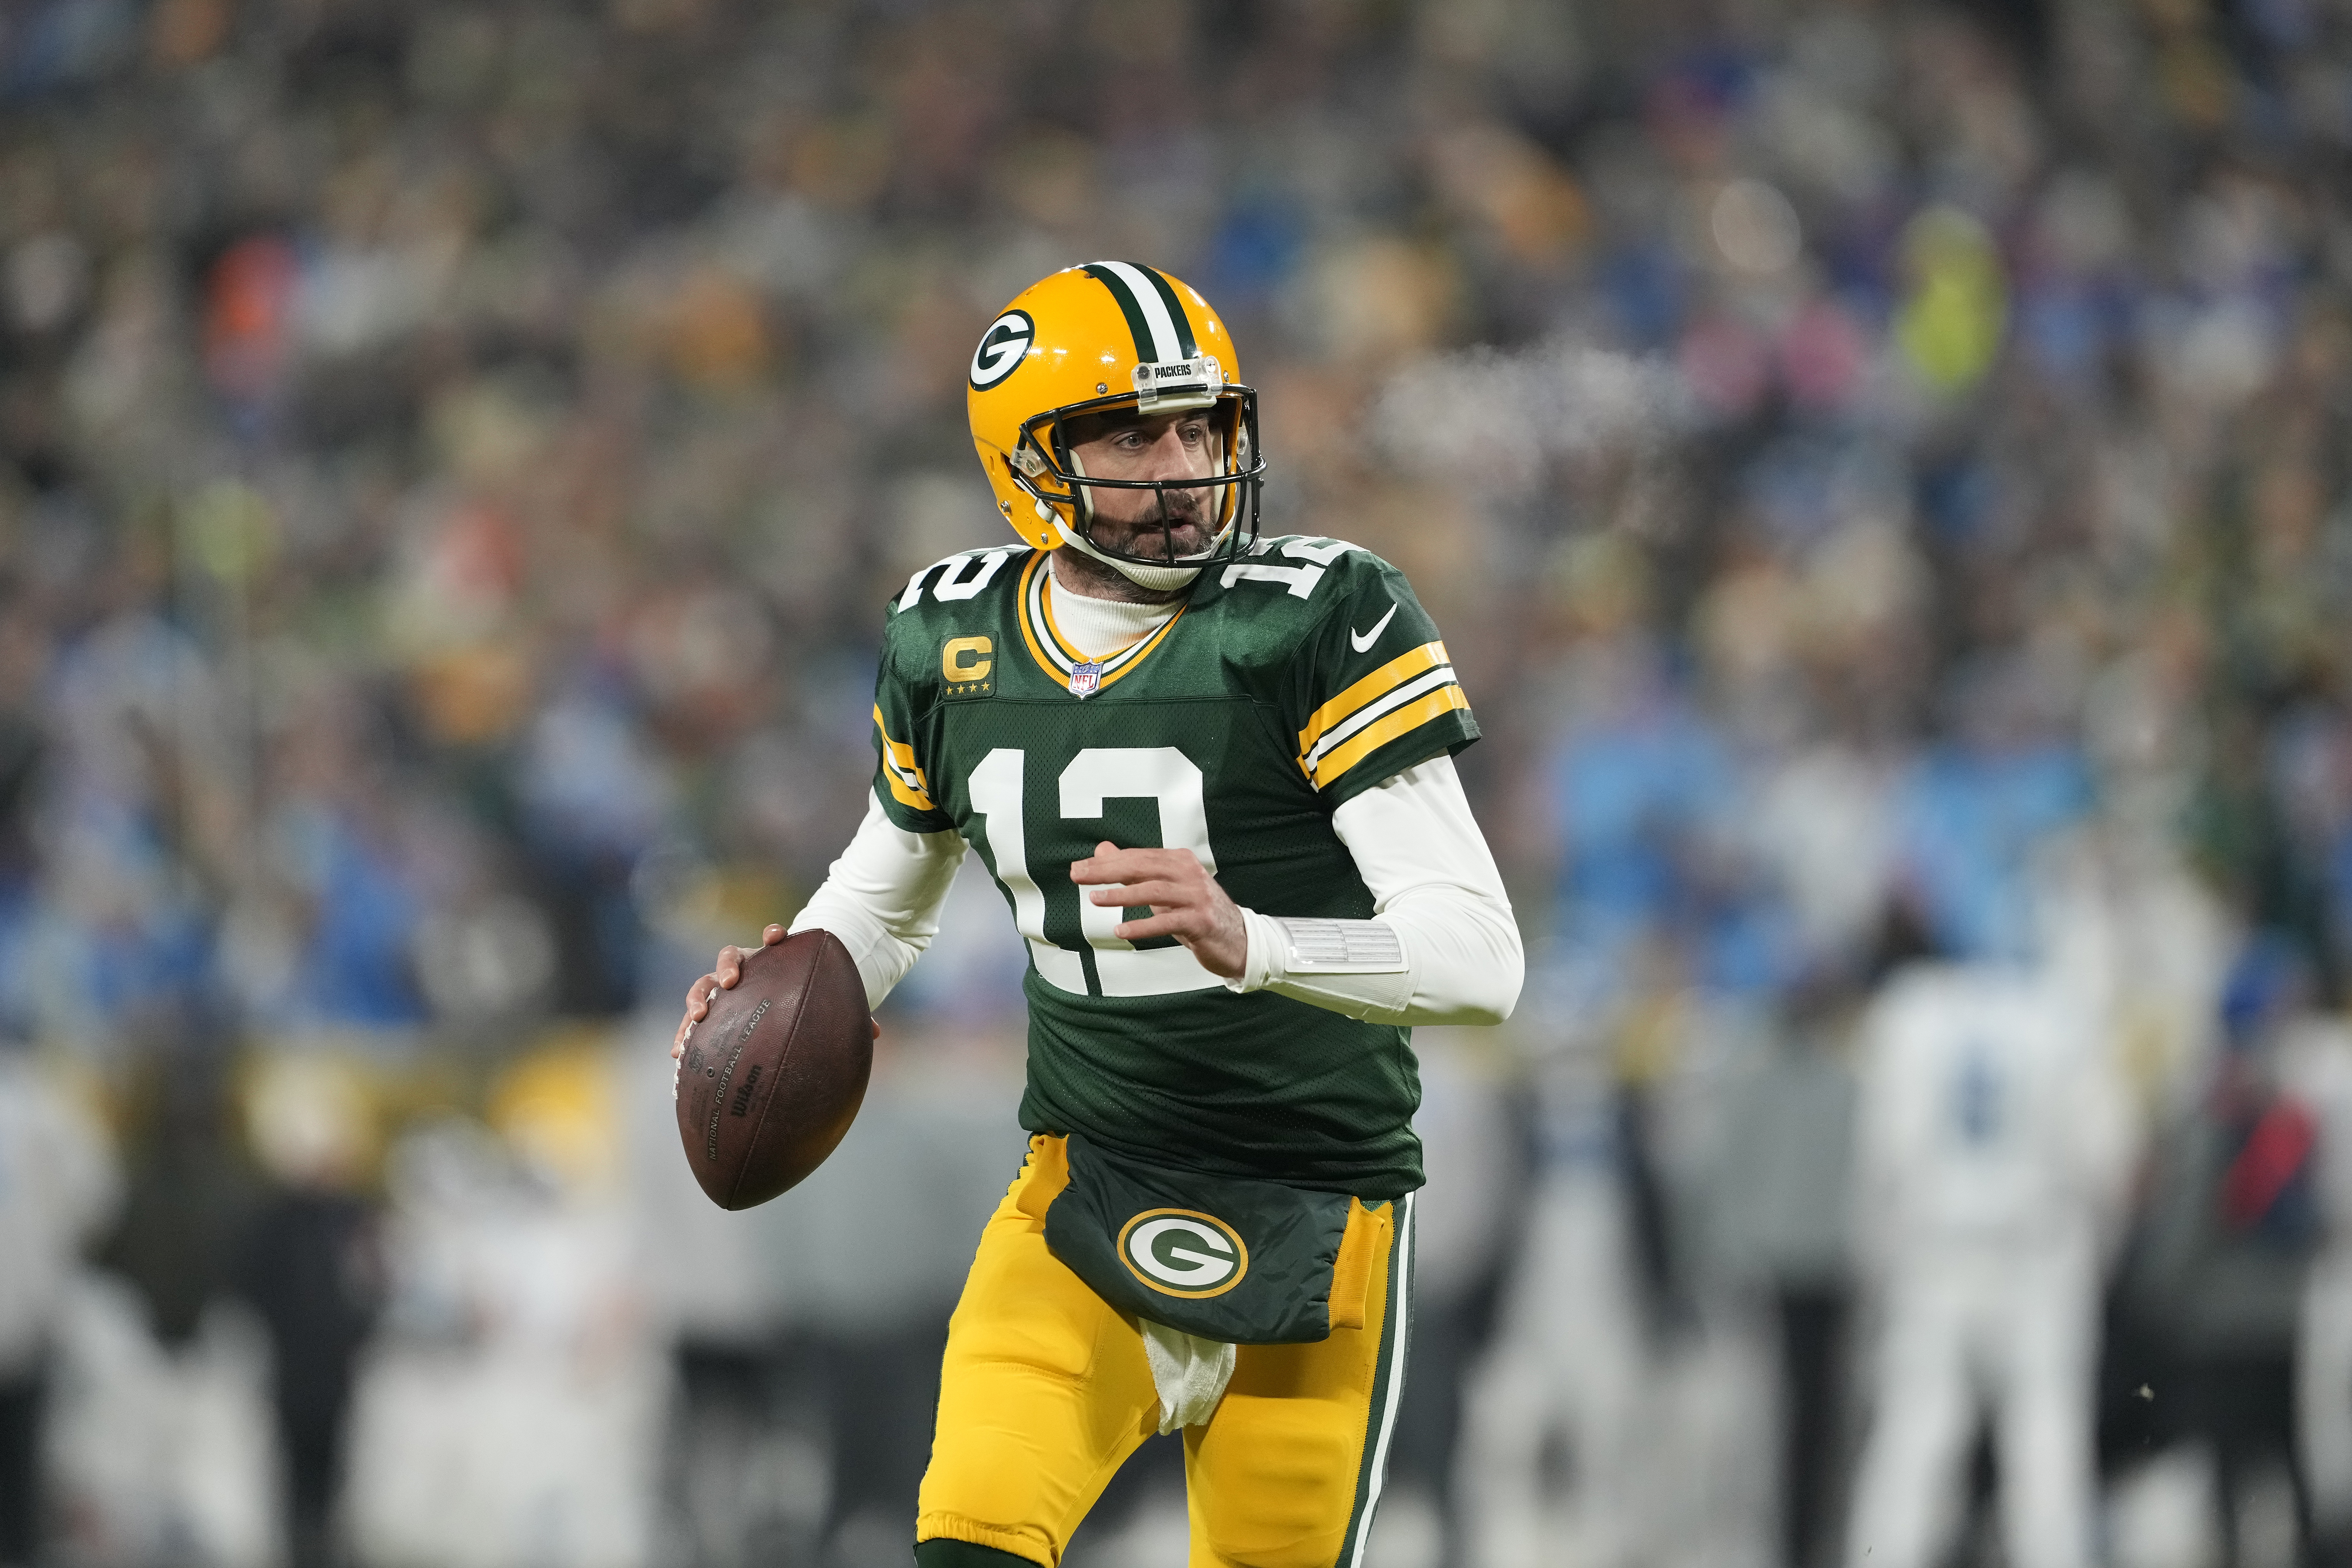 Aaron Rodgers of the Green Bay Packers scrambles with the ball against the Detroit Lions in the first half at Lambeau Field on January 08, 2023 in Green Bay, Wisconsin.